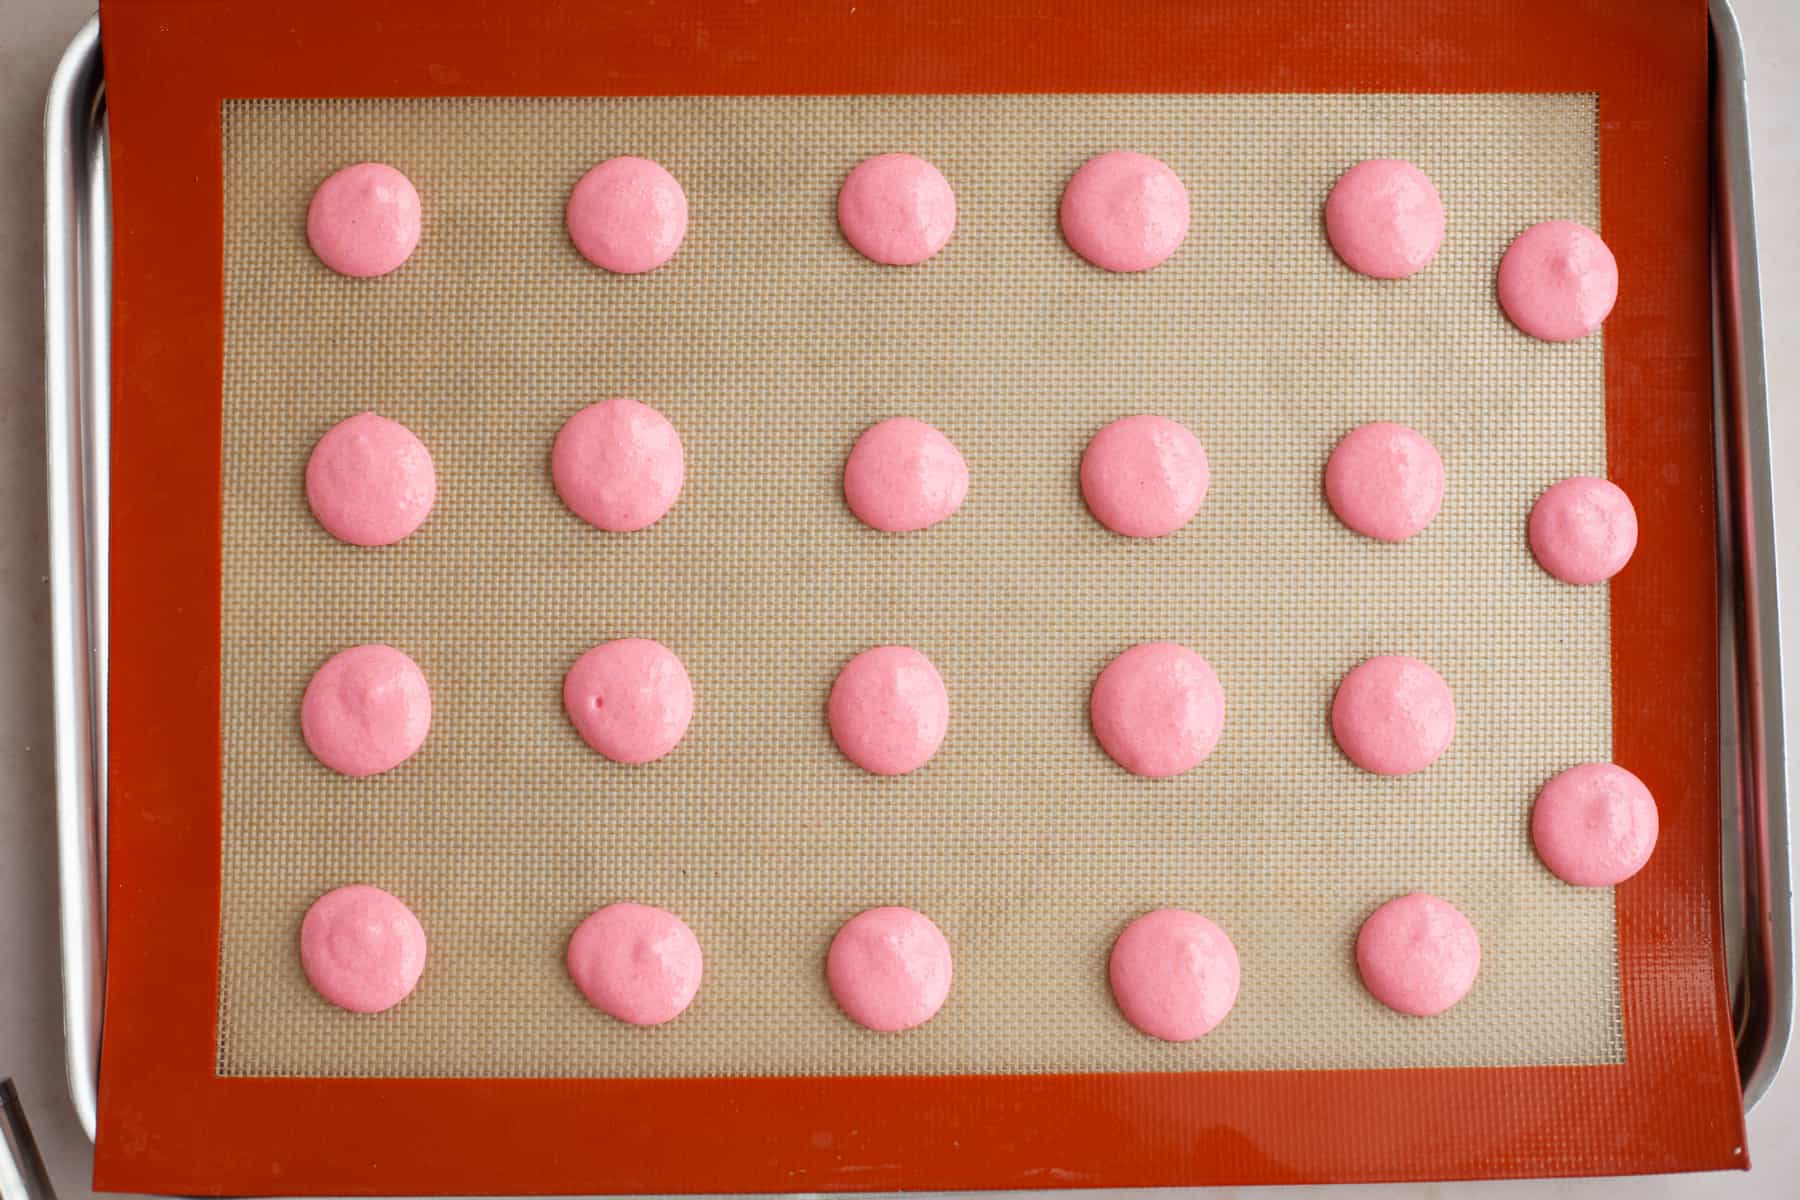 A baking tray with a silpat baking mat and piped out pink macaron shells, unbaked